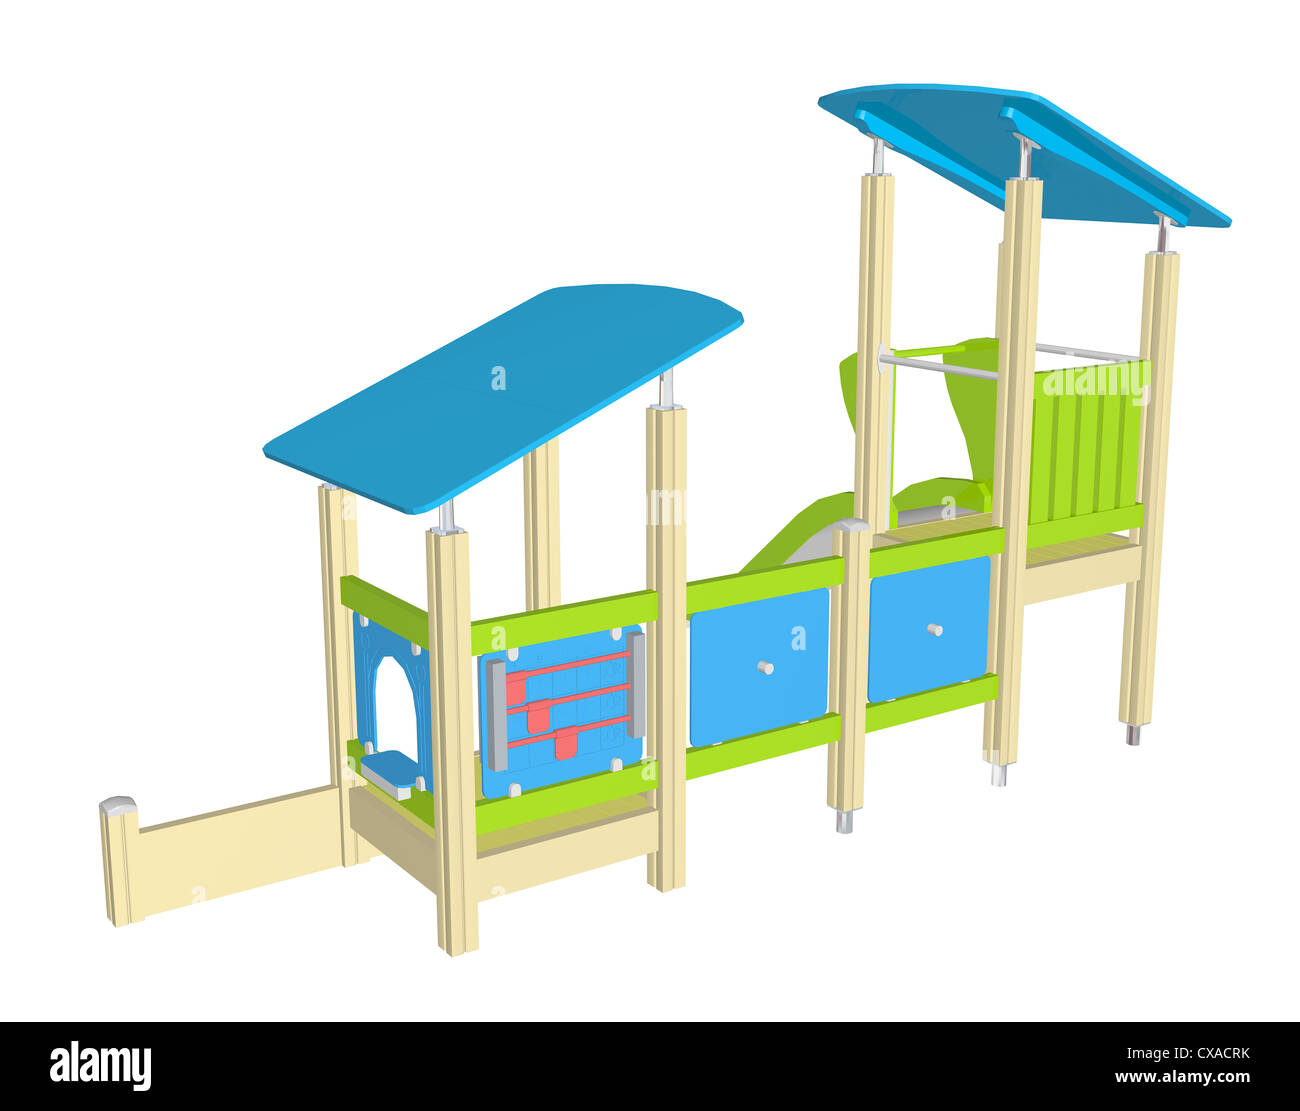 Playhouse with slide, blue green and yellow, 3D illustration Stock Photo